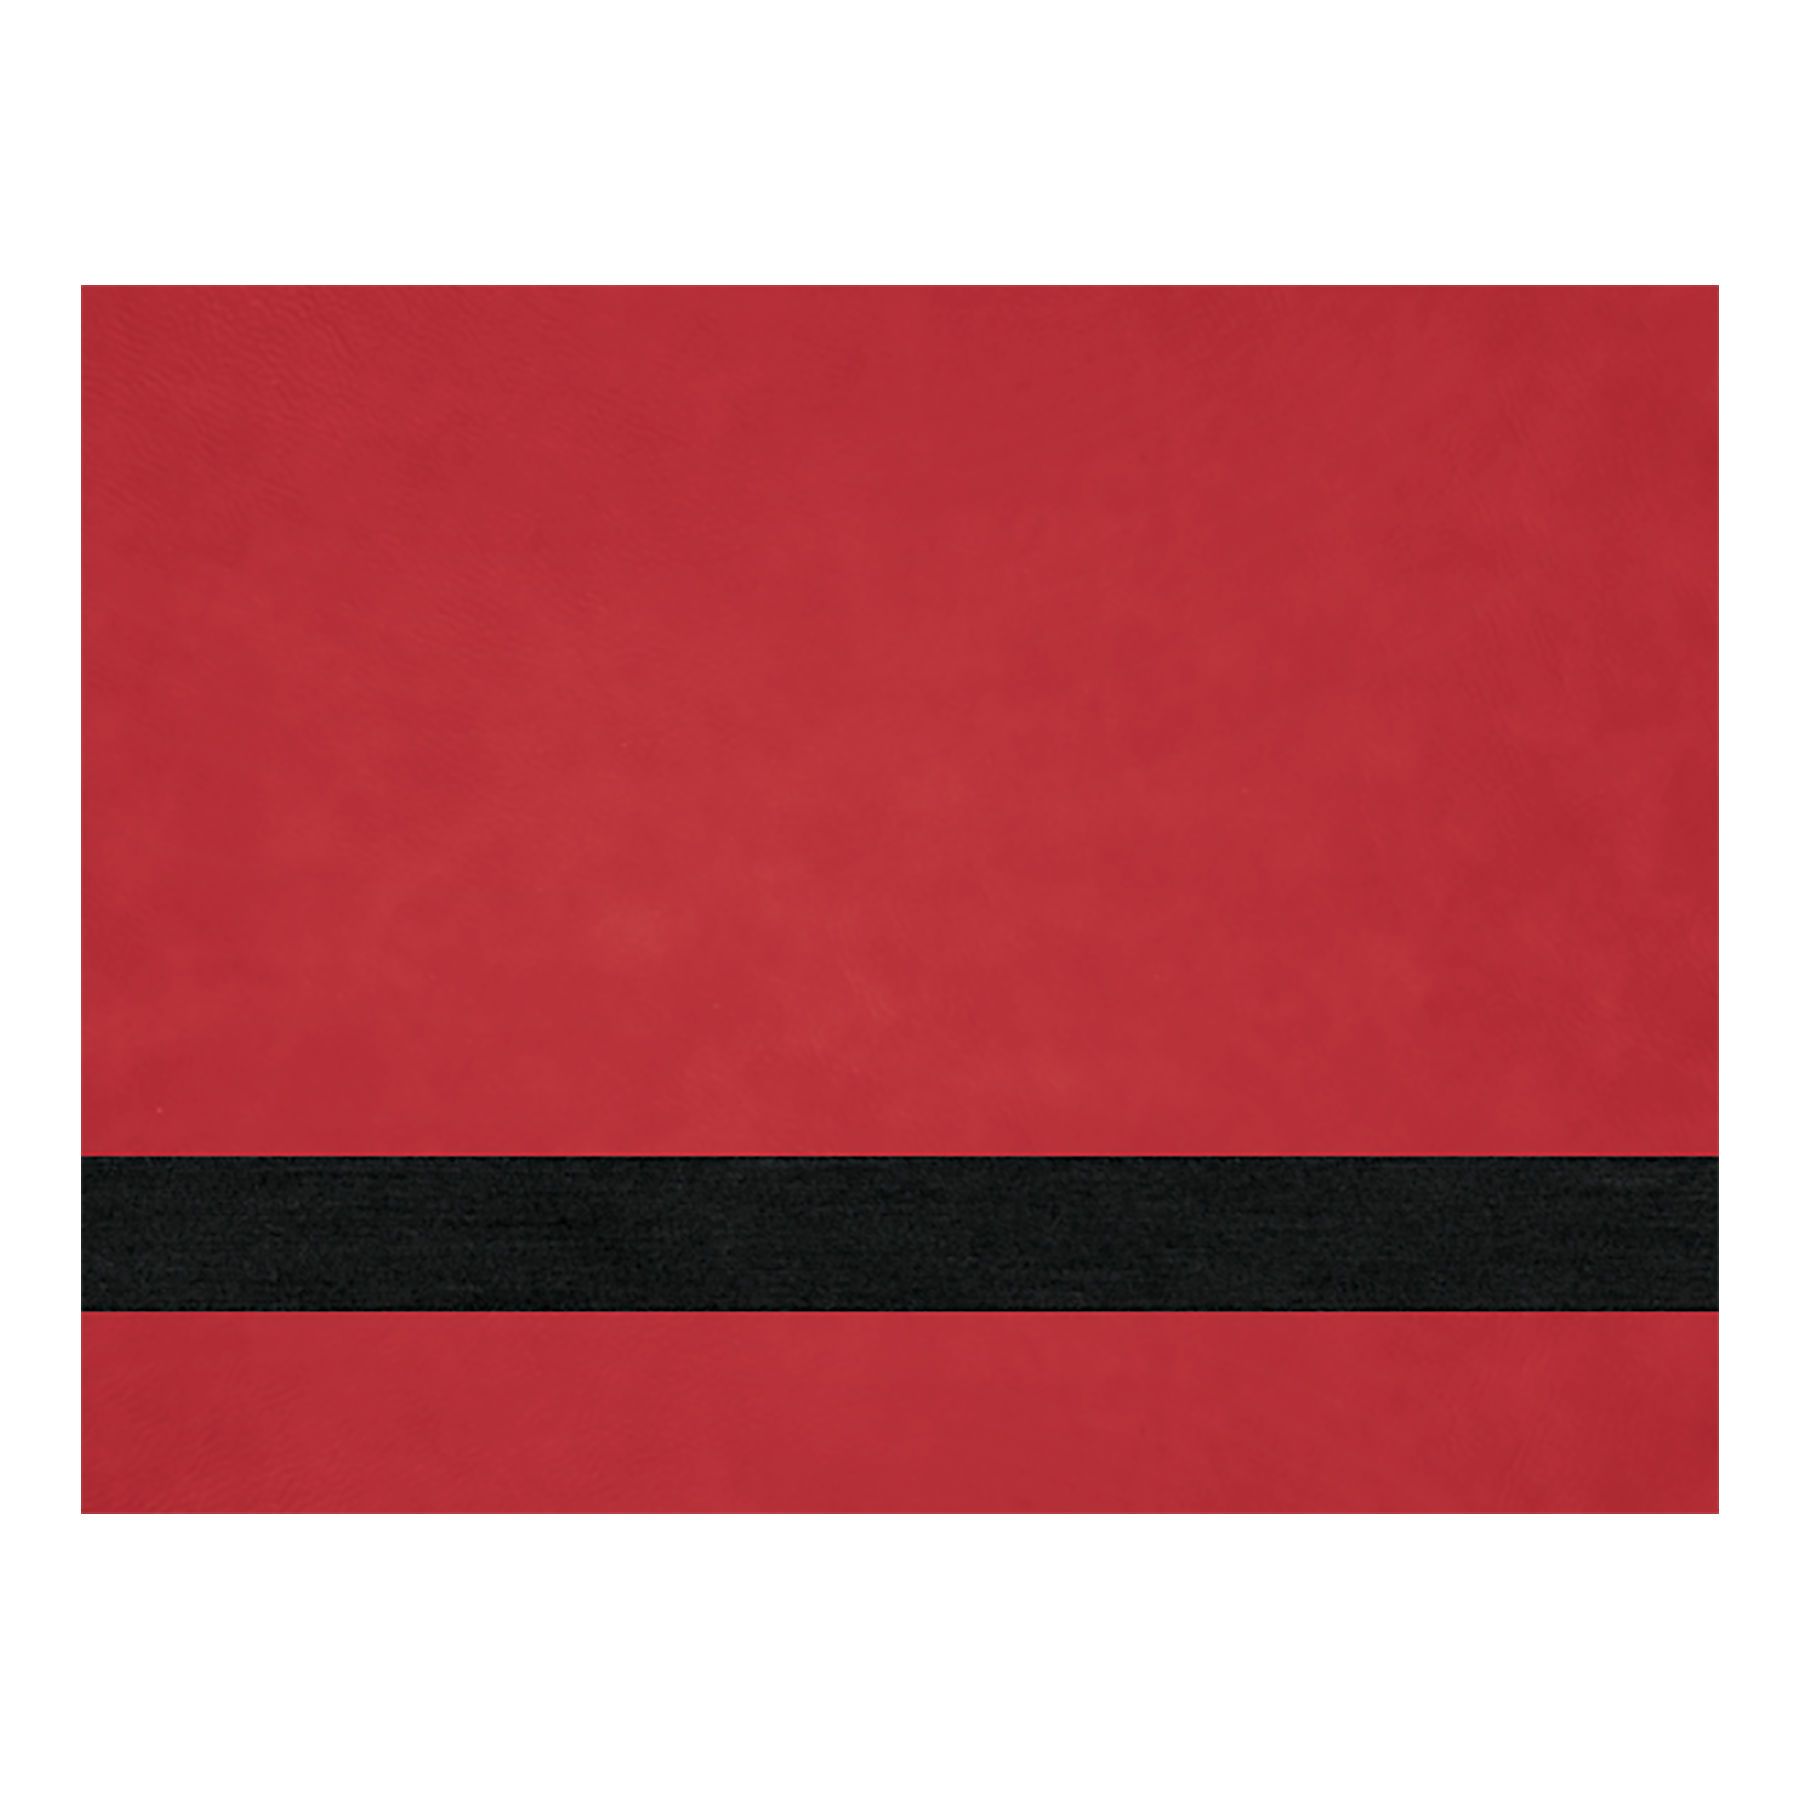 Sheet Stock w/Adhesive Backing, Laserable Leatherette, 6" x 9" Engraving Supplies Craftworks NW Red/Black 